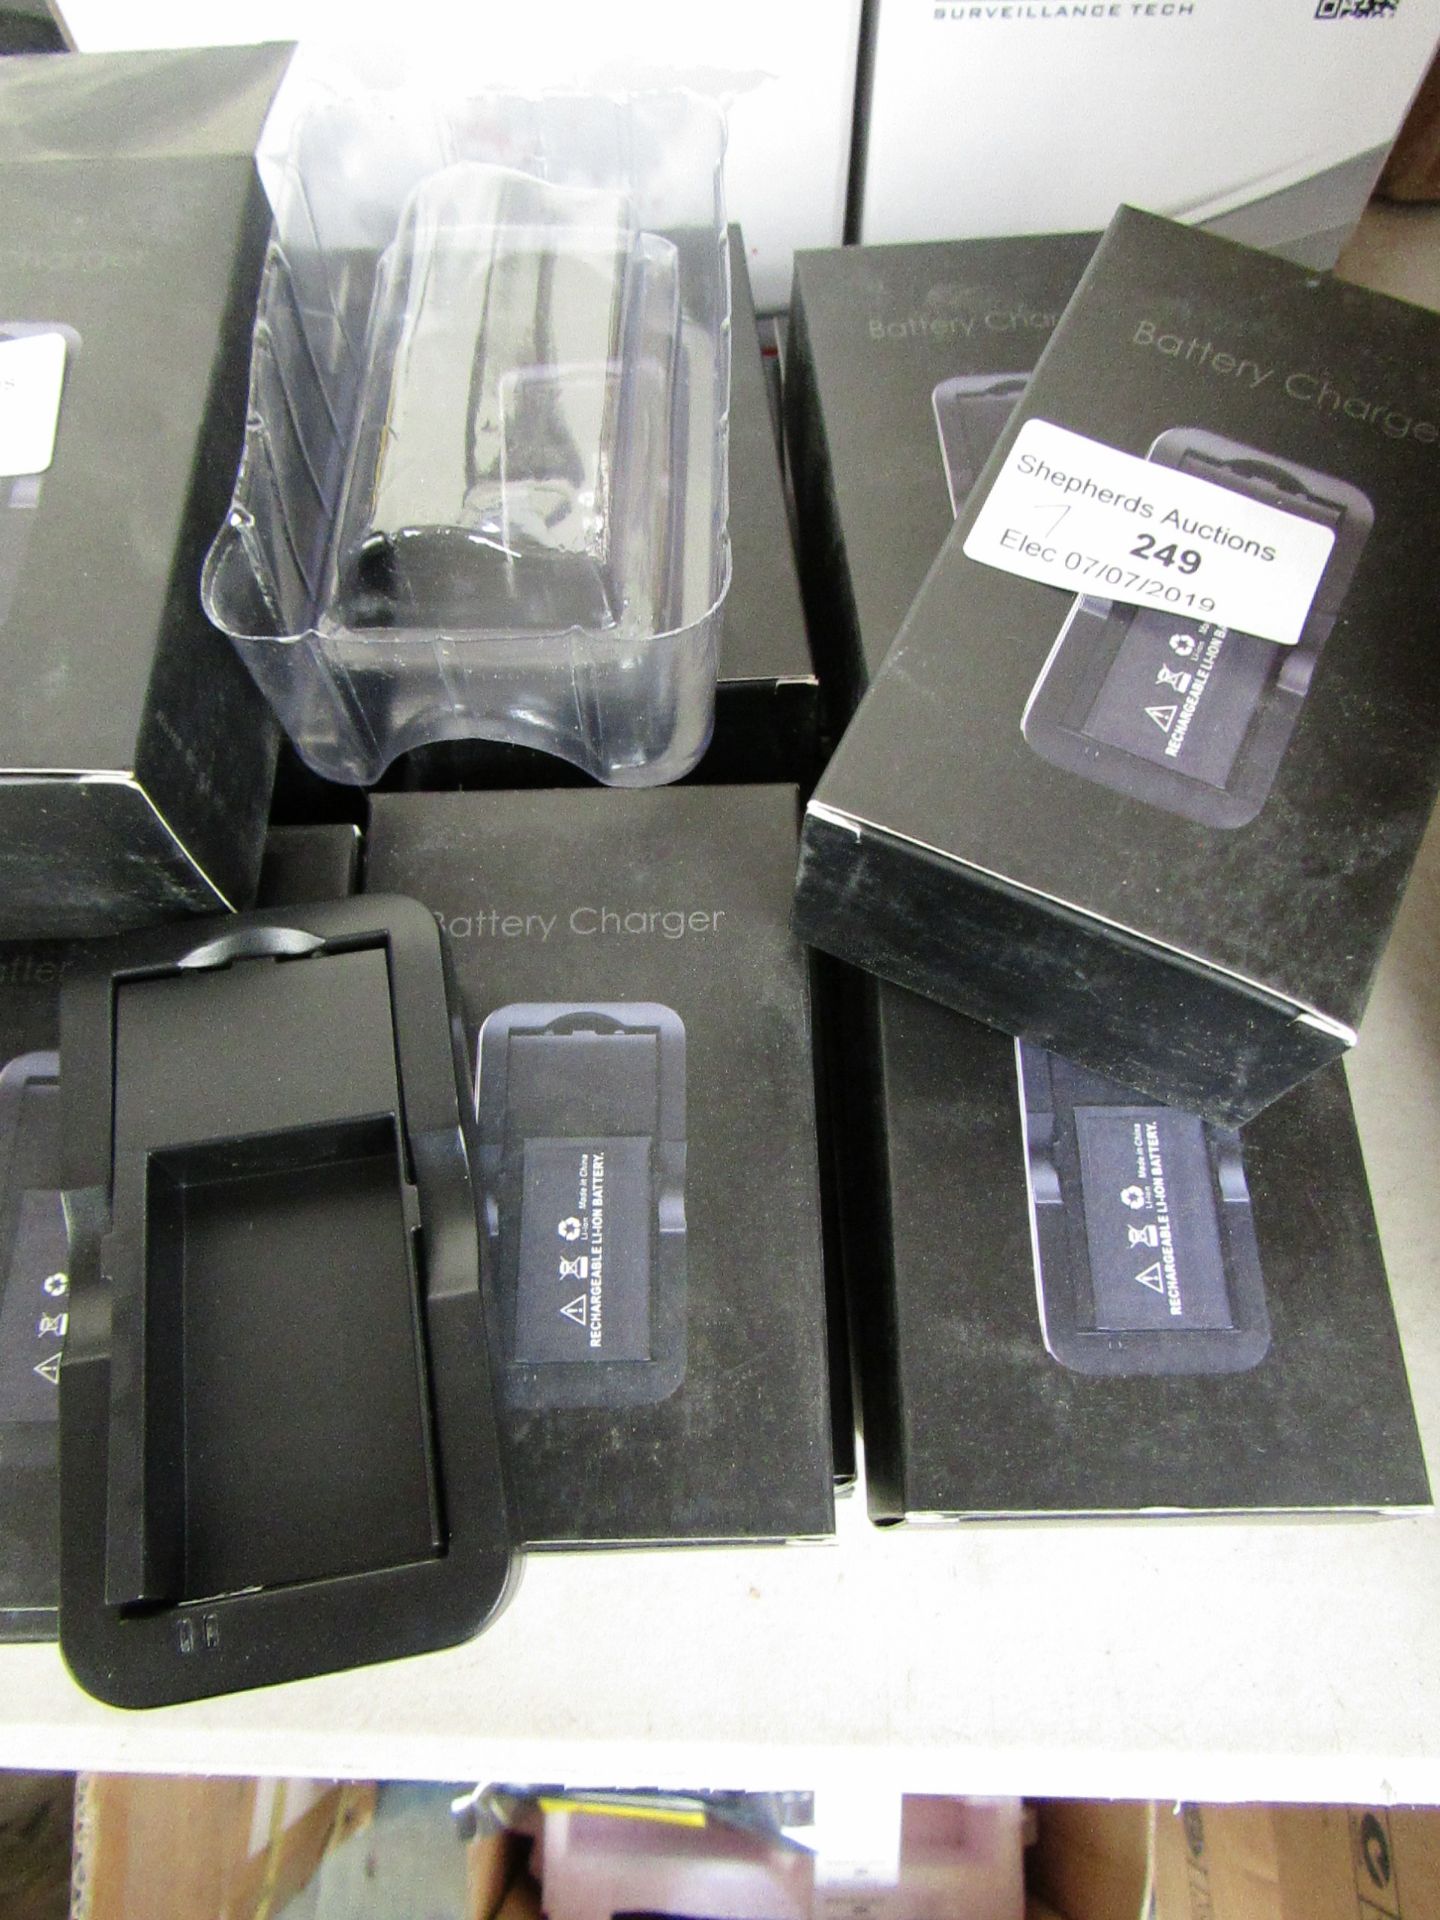 7x Battery Chargers, new and boxed